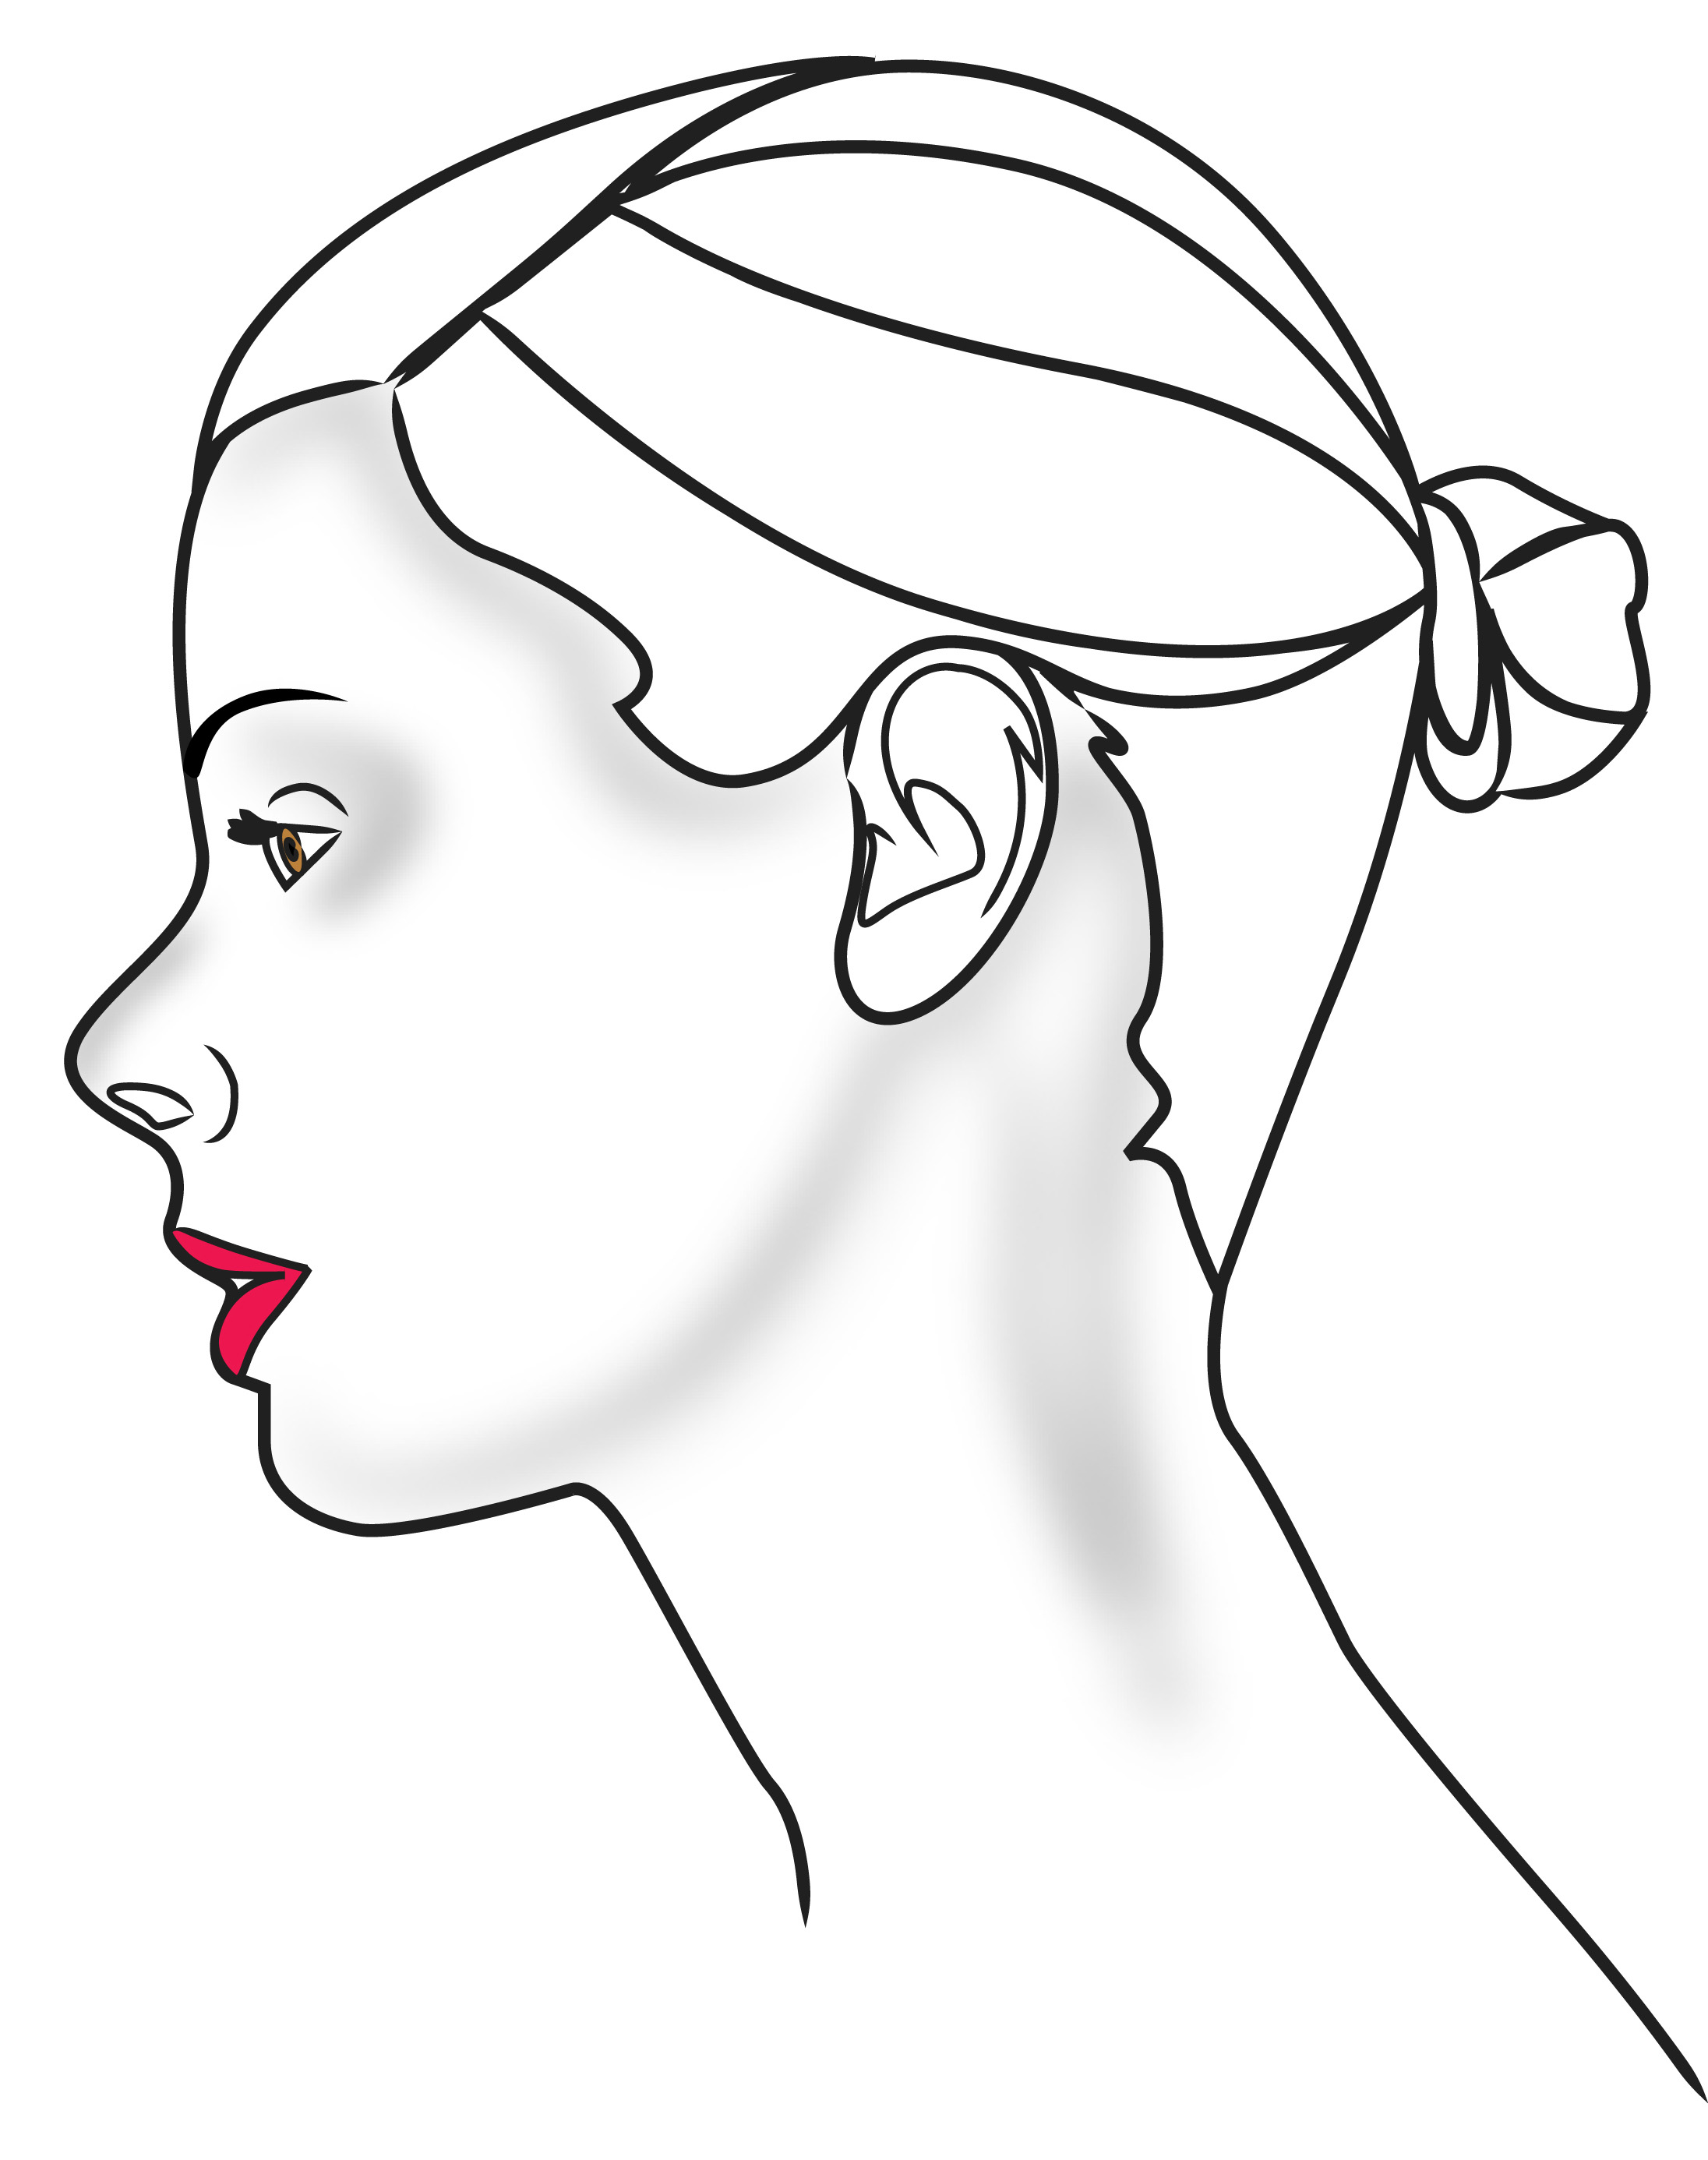 Outline Of A Head - ClipArt Best